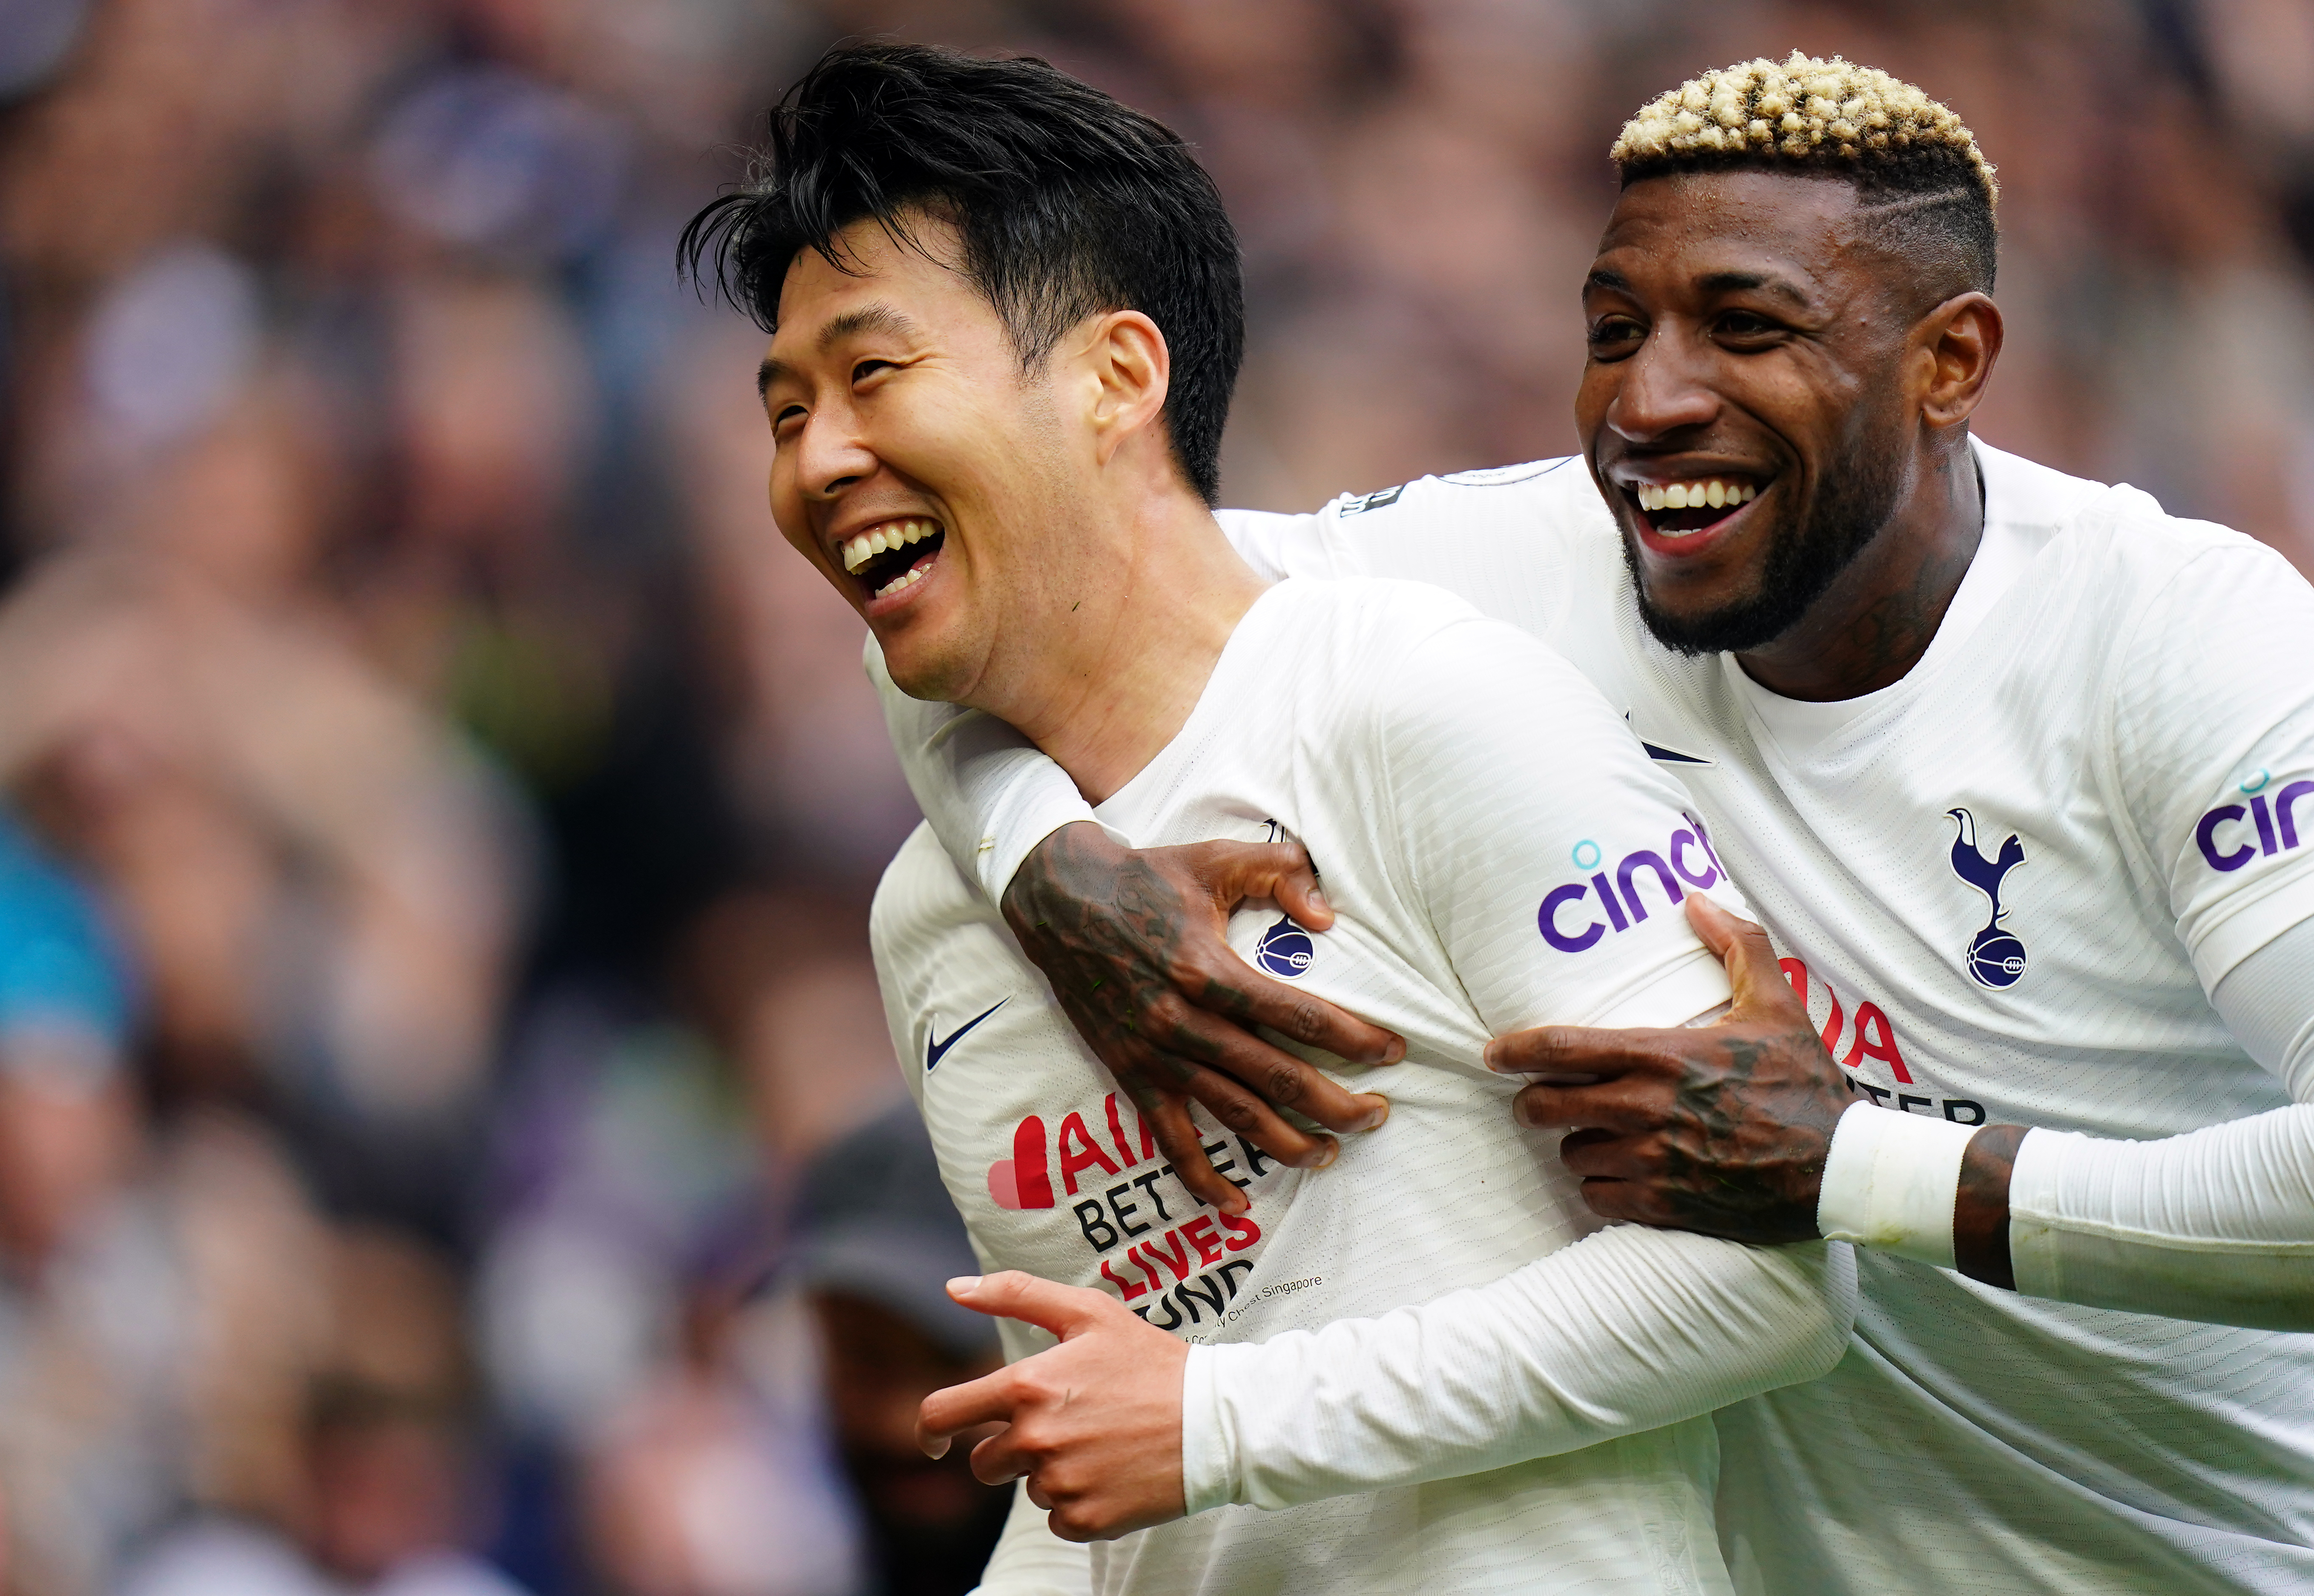 Tottenham Hotspur’s Son Heung-min celebrates scoring their side’s third goal of the game with team-mate Emerson Royal (right) during the Premier League match at the Tottenham Hotspur Stadium, London. Picture date: Sunday May 1, 2022